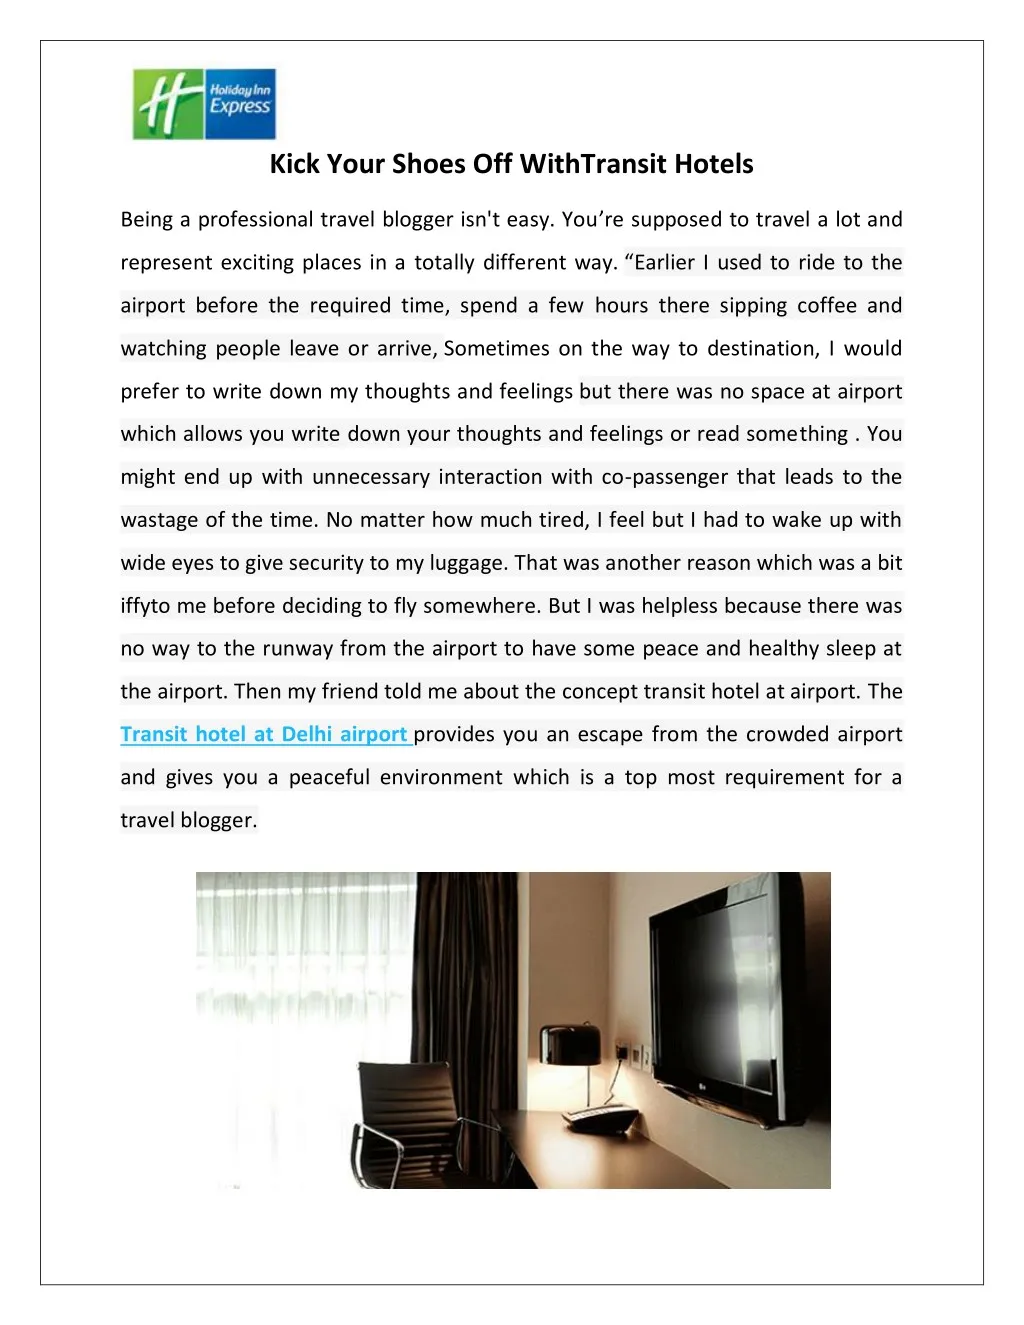 kick your shoes off withtransit hotels